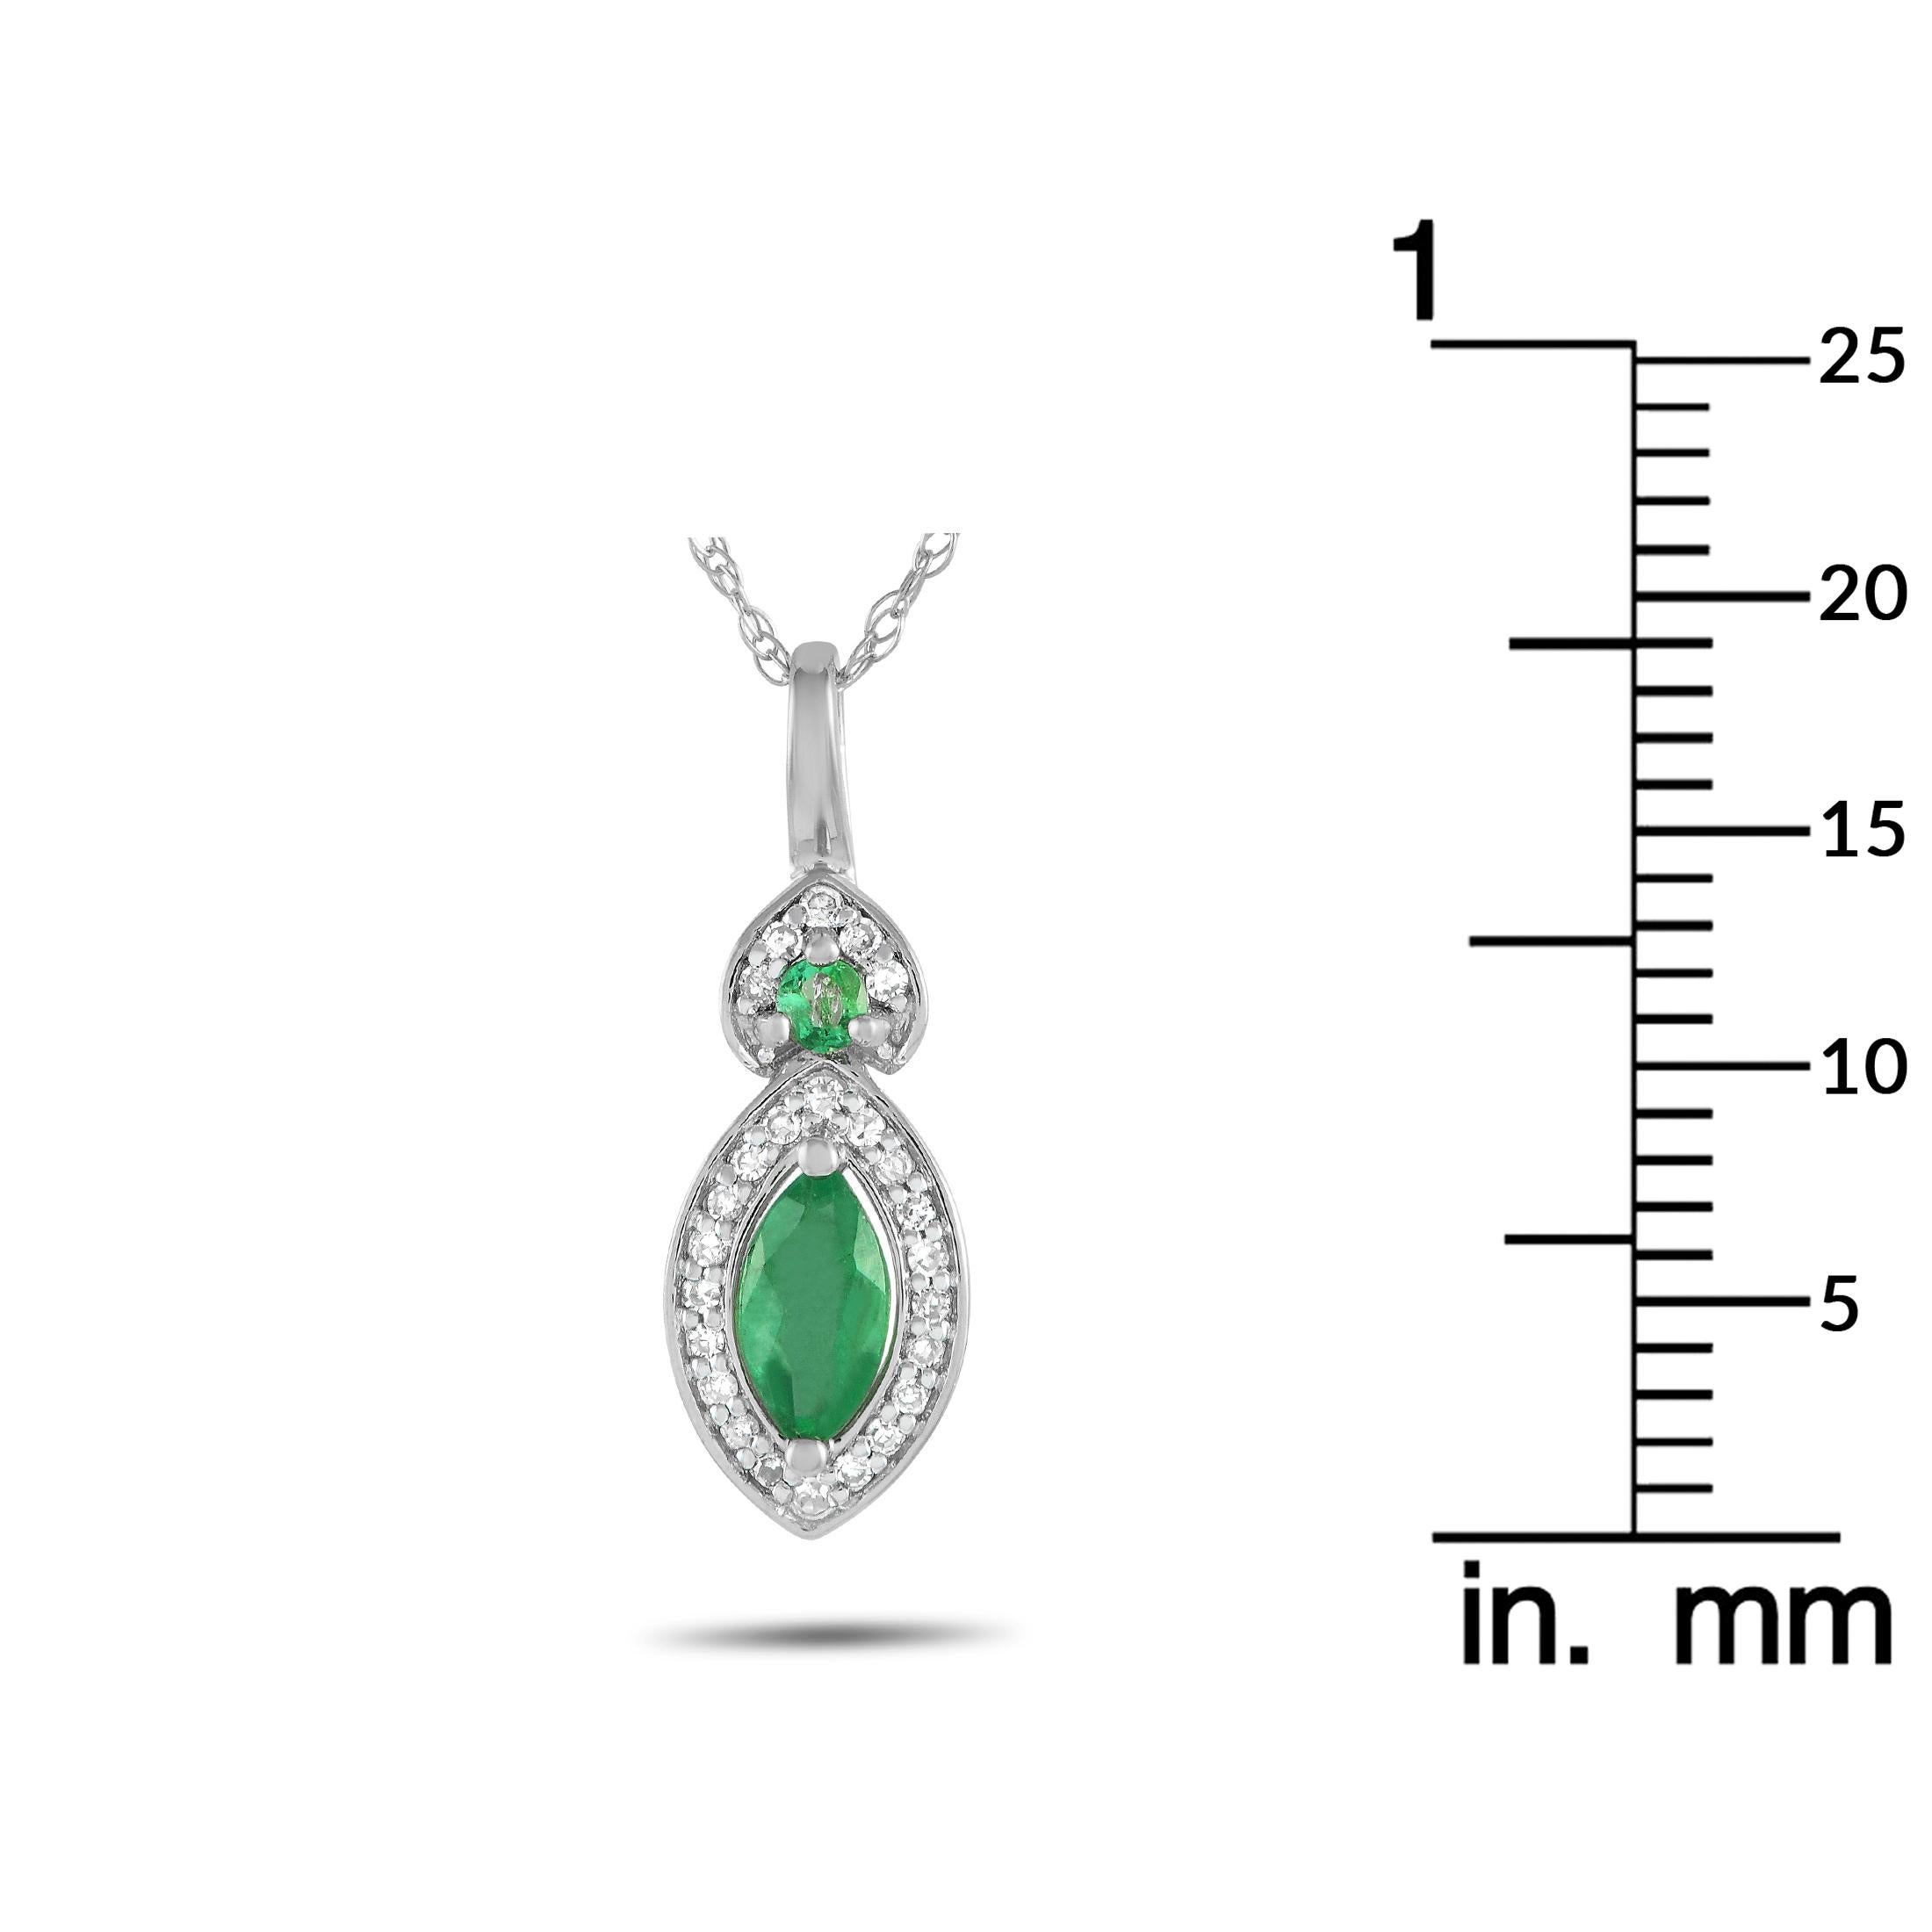 LB Exclusive 14K White Gold 0.07ct Diamond Pendant Necklace PD4-16299WEM In New Condition For Sale In Southampton, PA